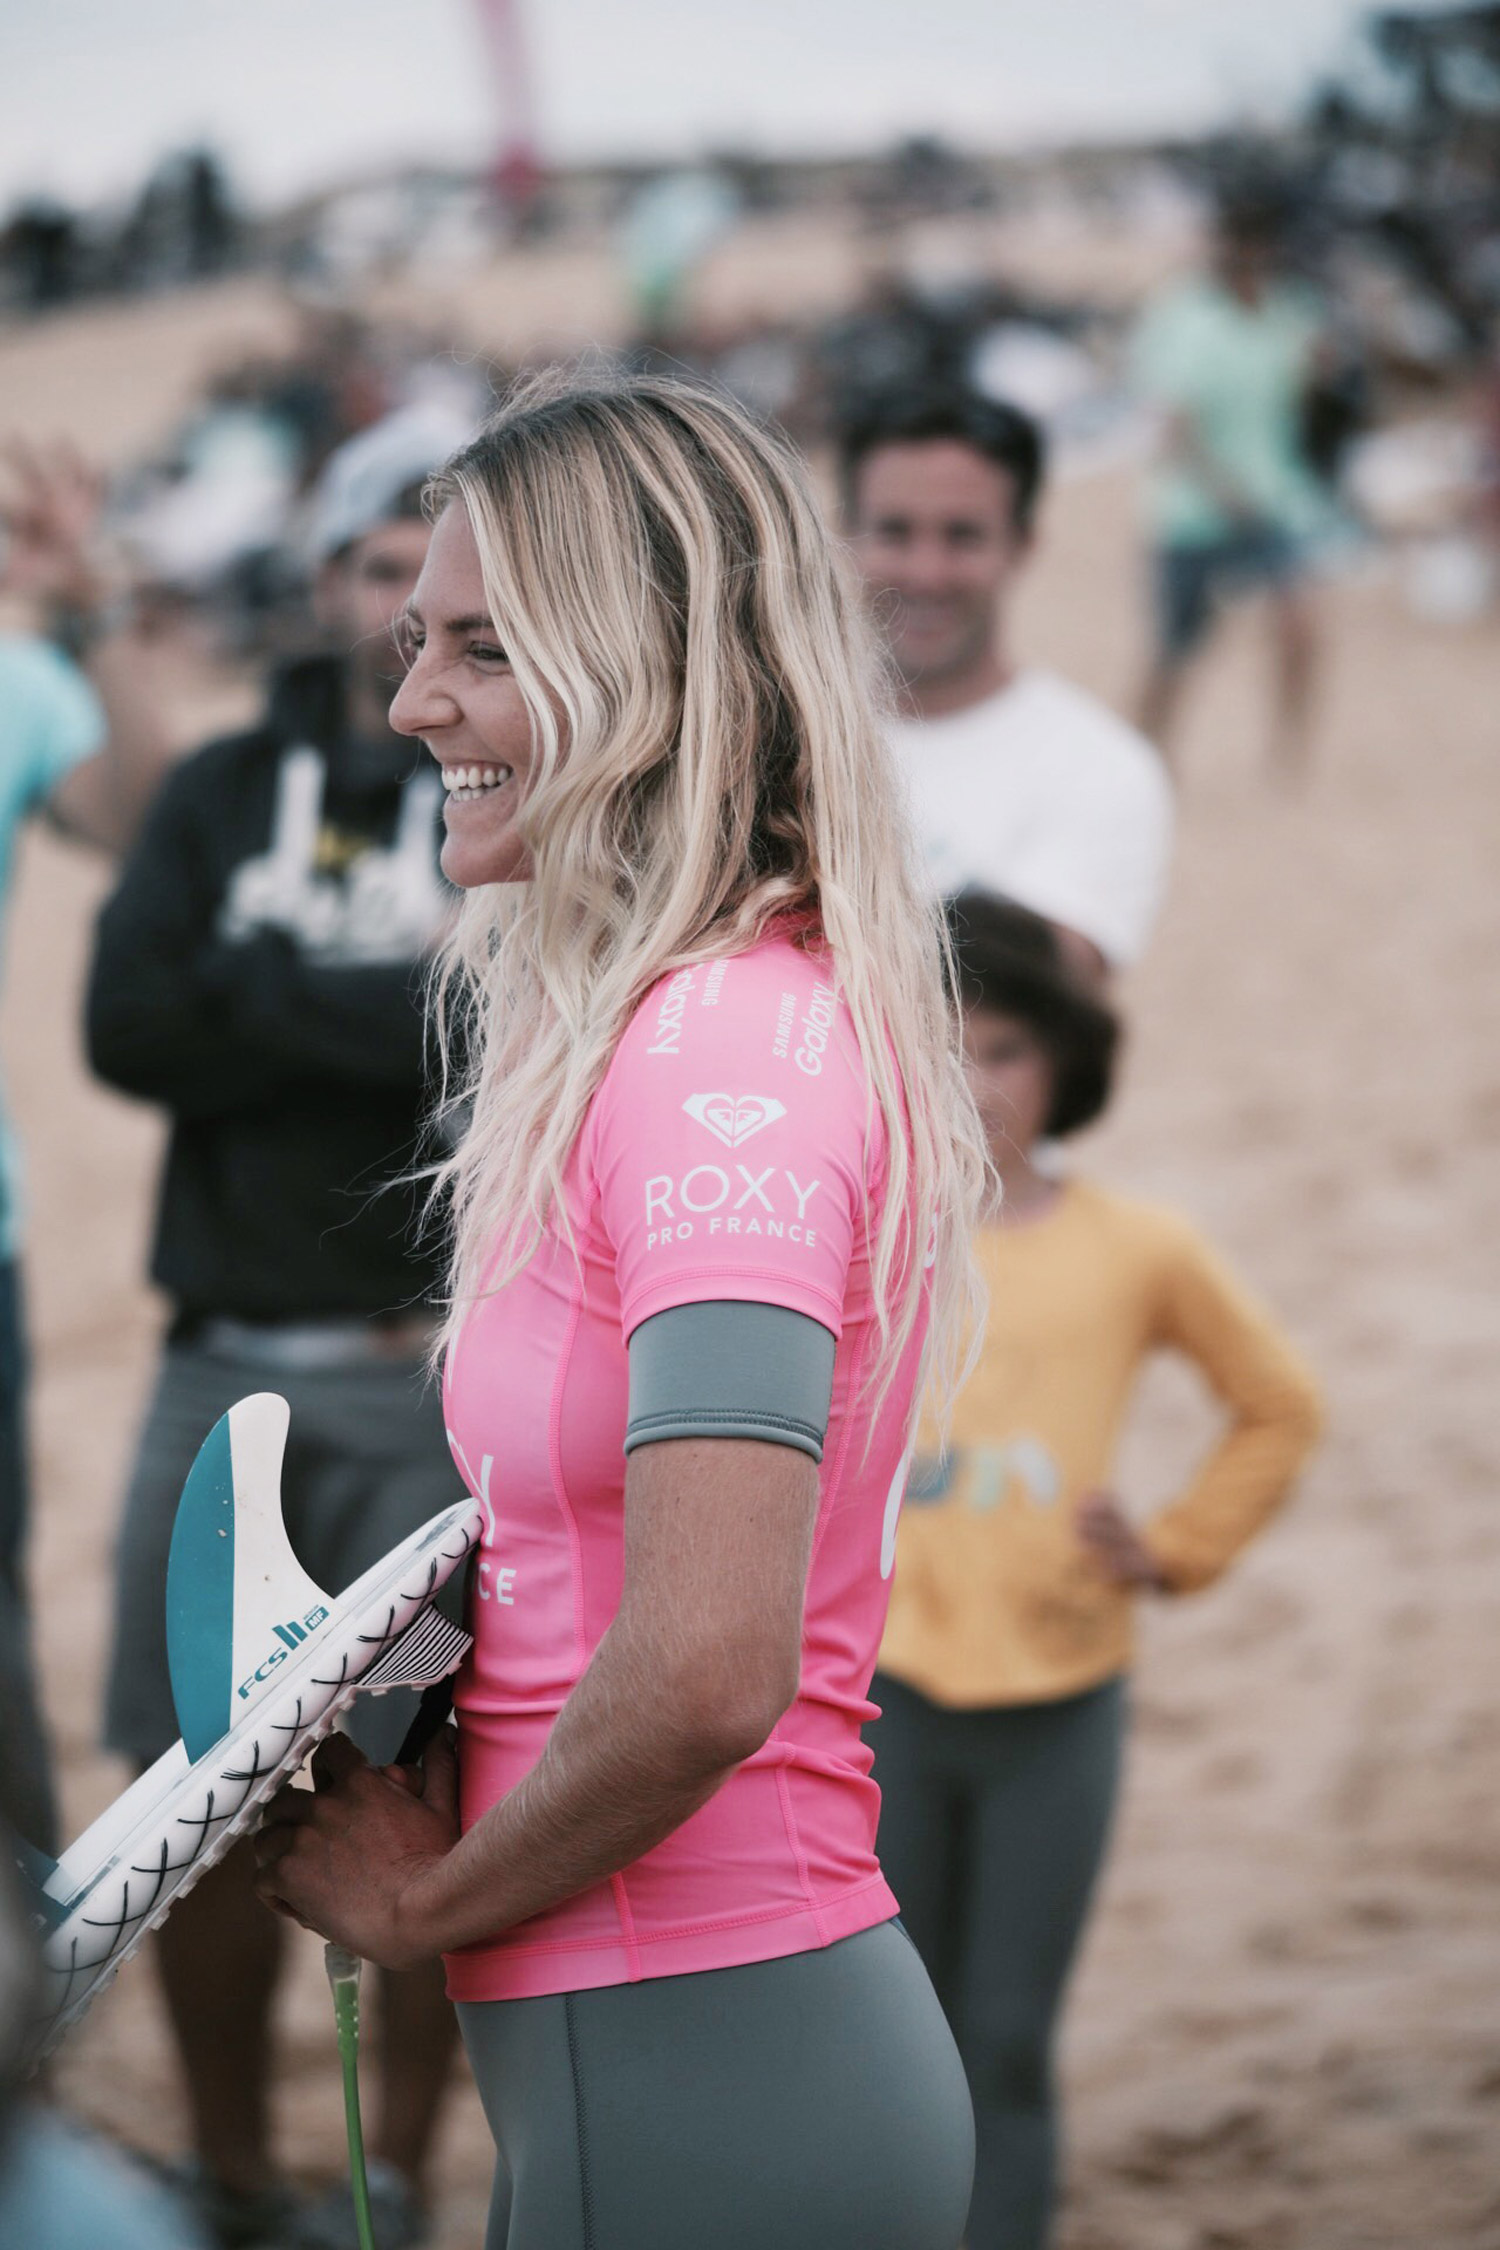 Cait Miers’ Top 10 Moments From the #ROXYpro France